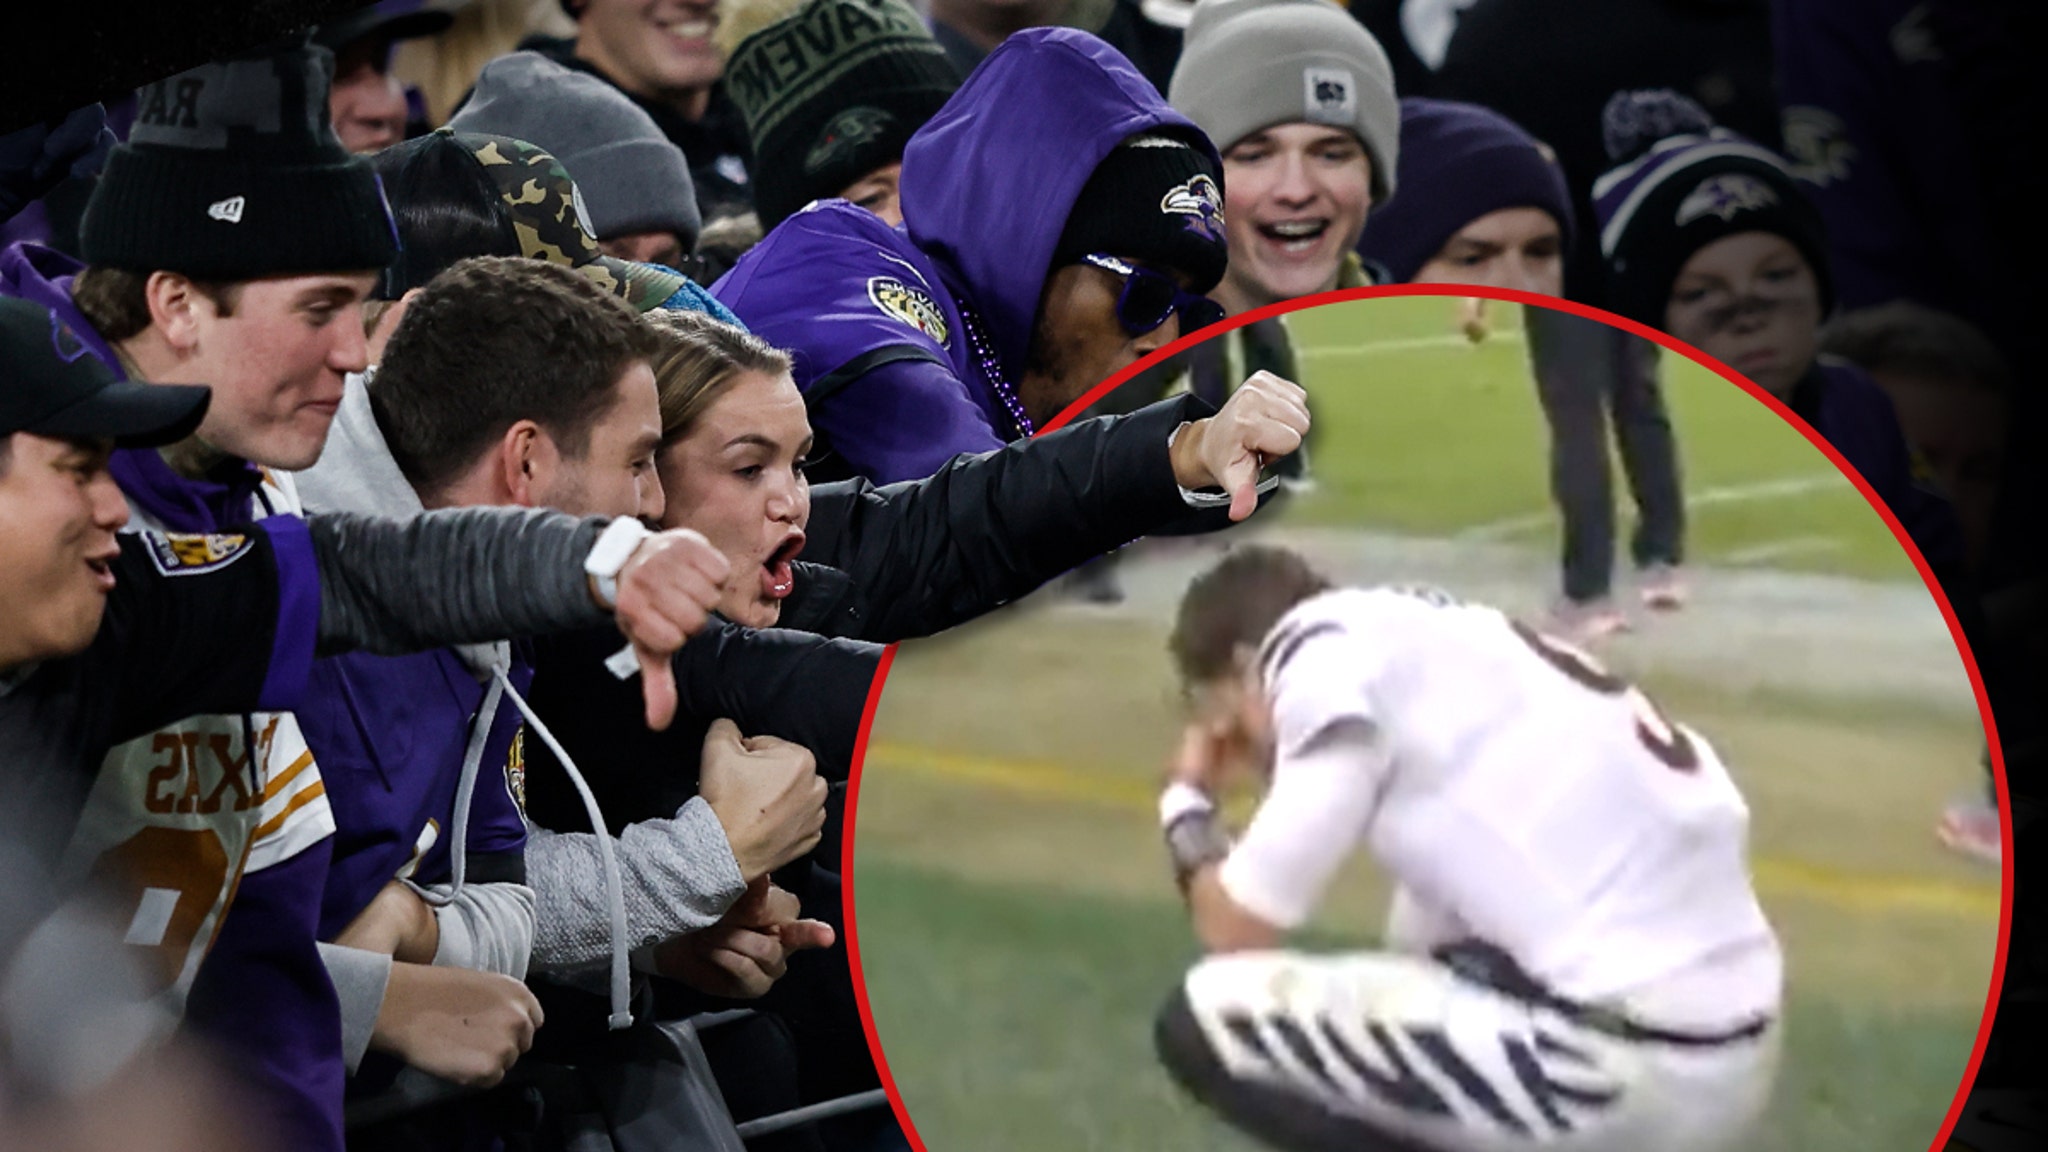 Ravens Fans Chant ‘F*** Joe Burrow’ After Injury in TNF Game